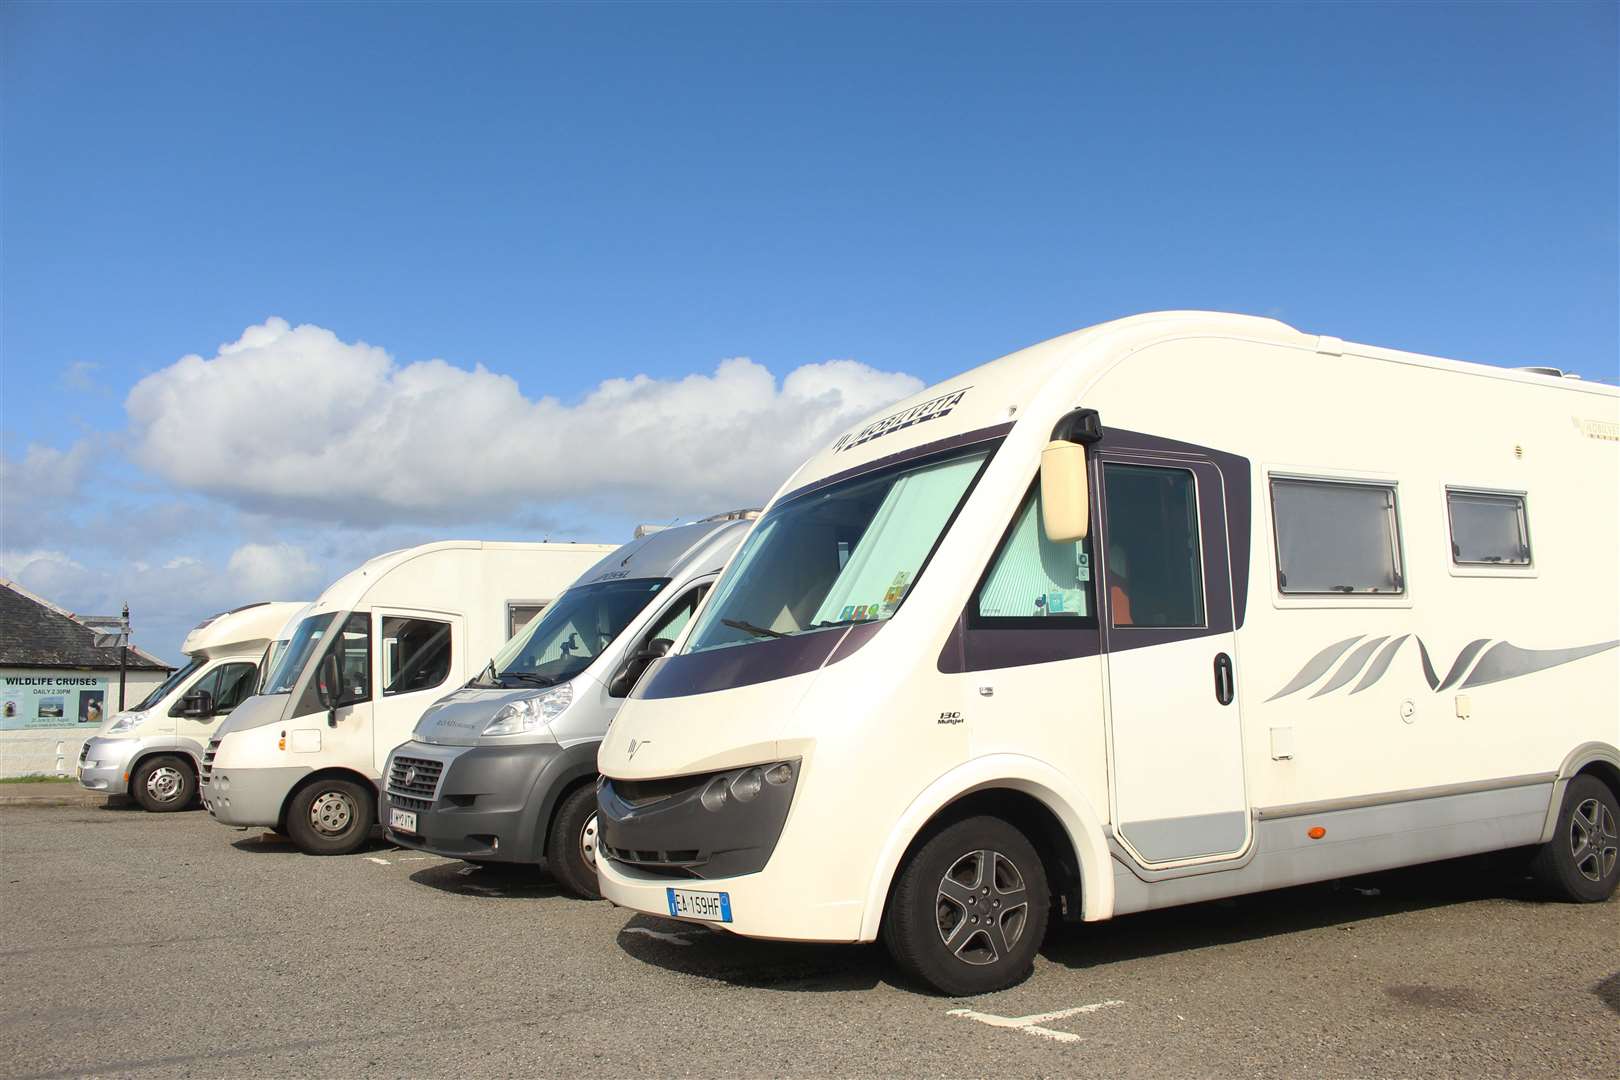 Campervans in the John O'Groats car park this summer. The village is a key destination on the North Coast 500 route.